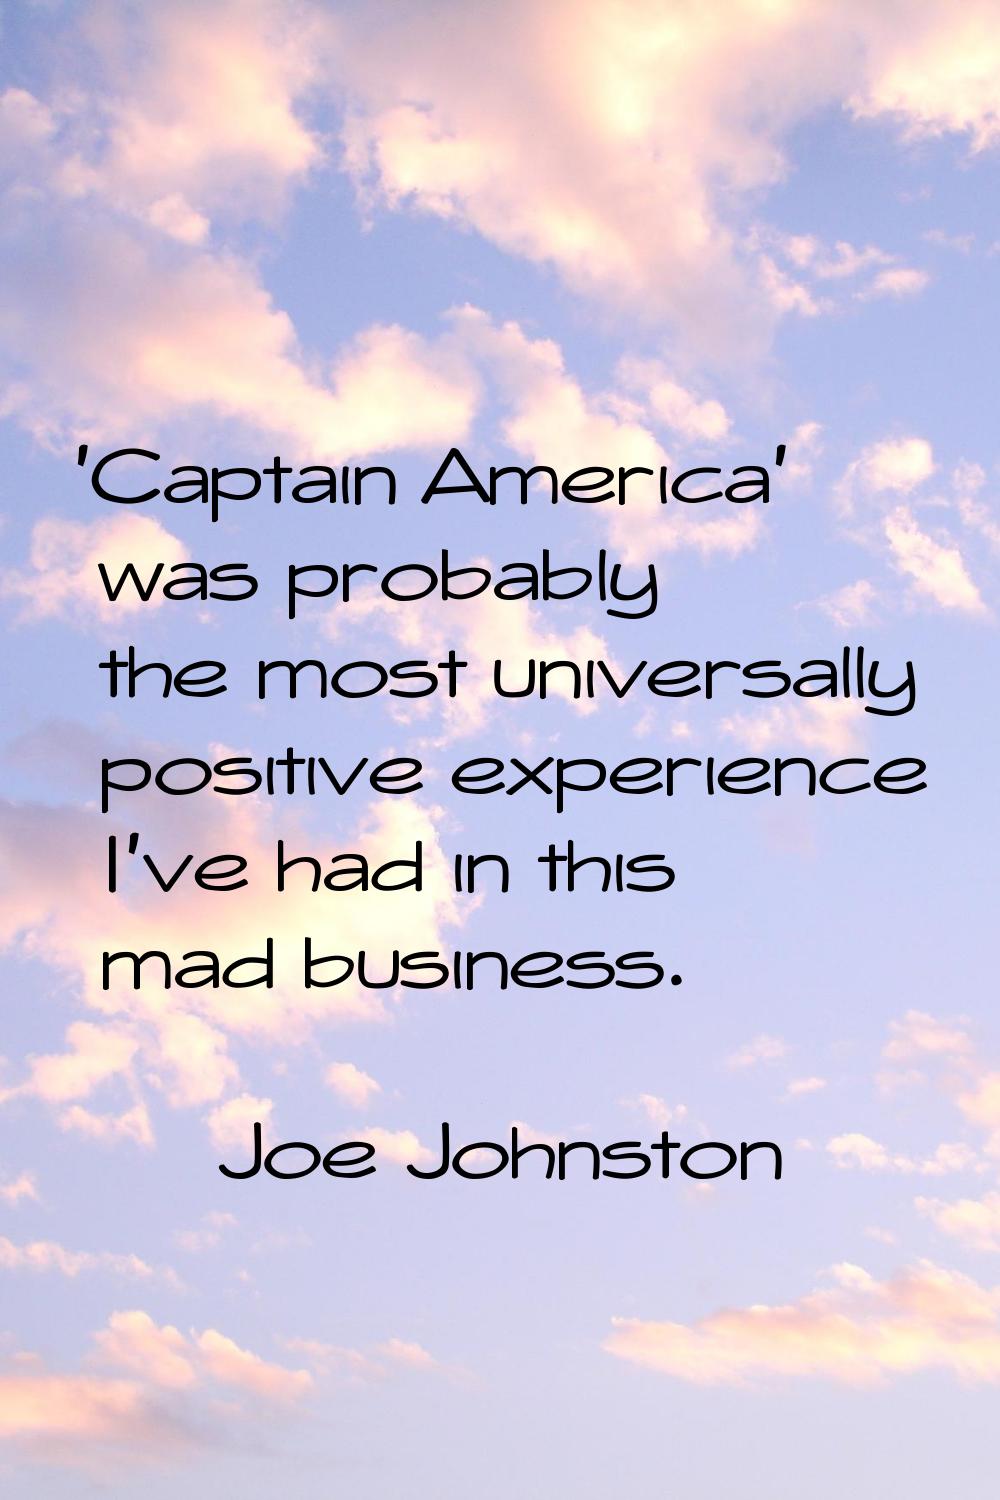 'Captain America' was probably the most universally positive experience I've had in this mad busine